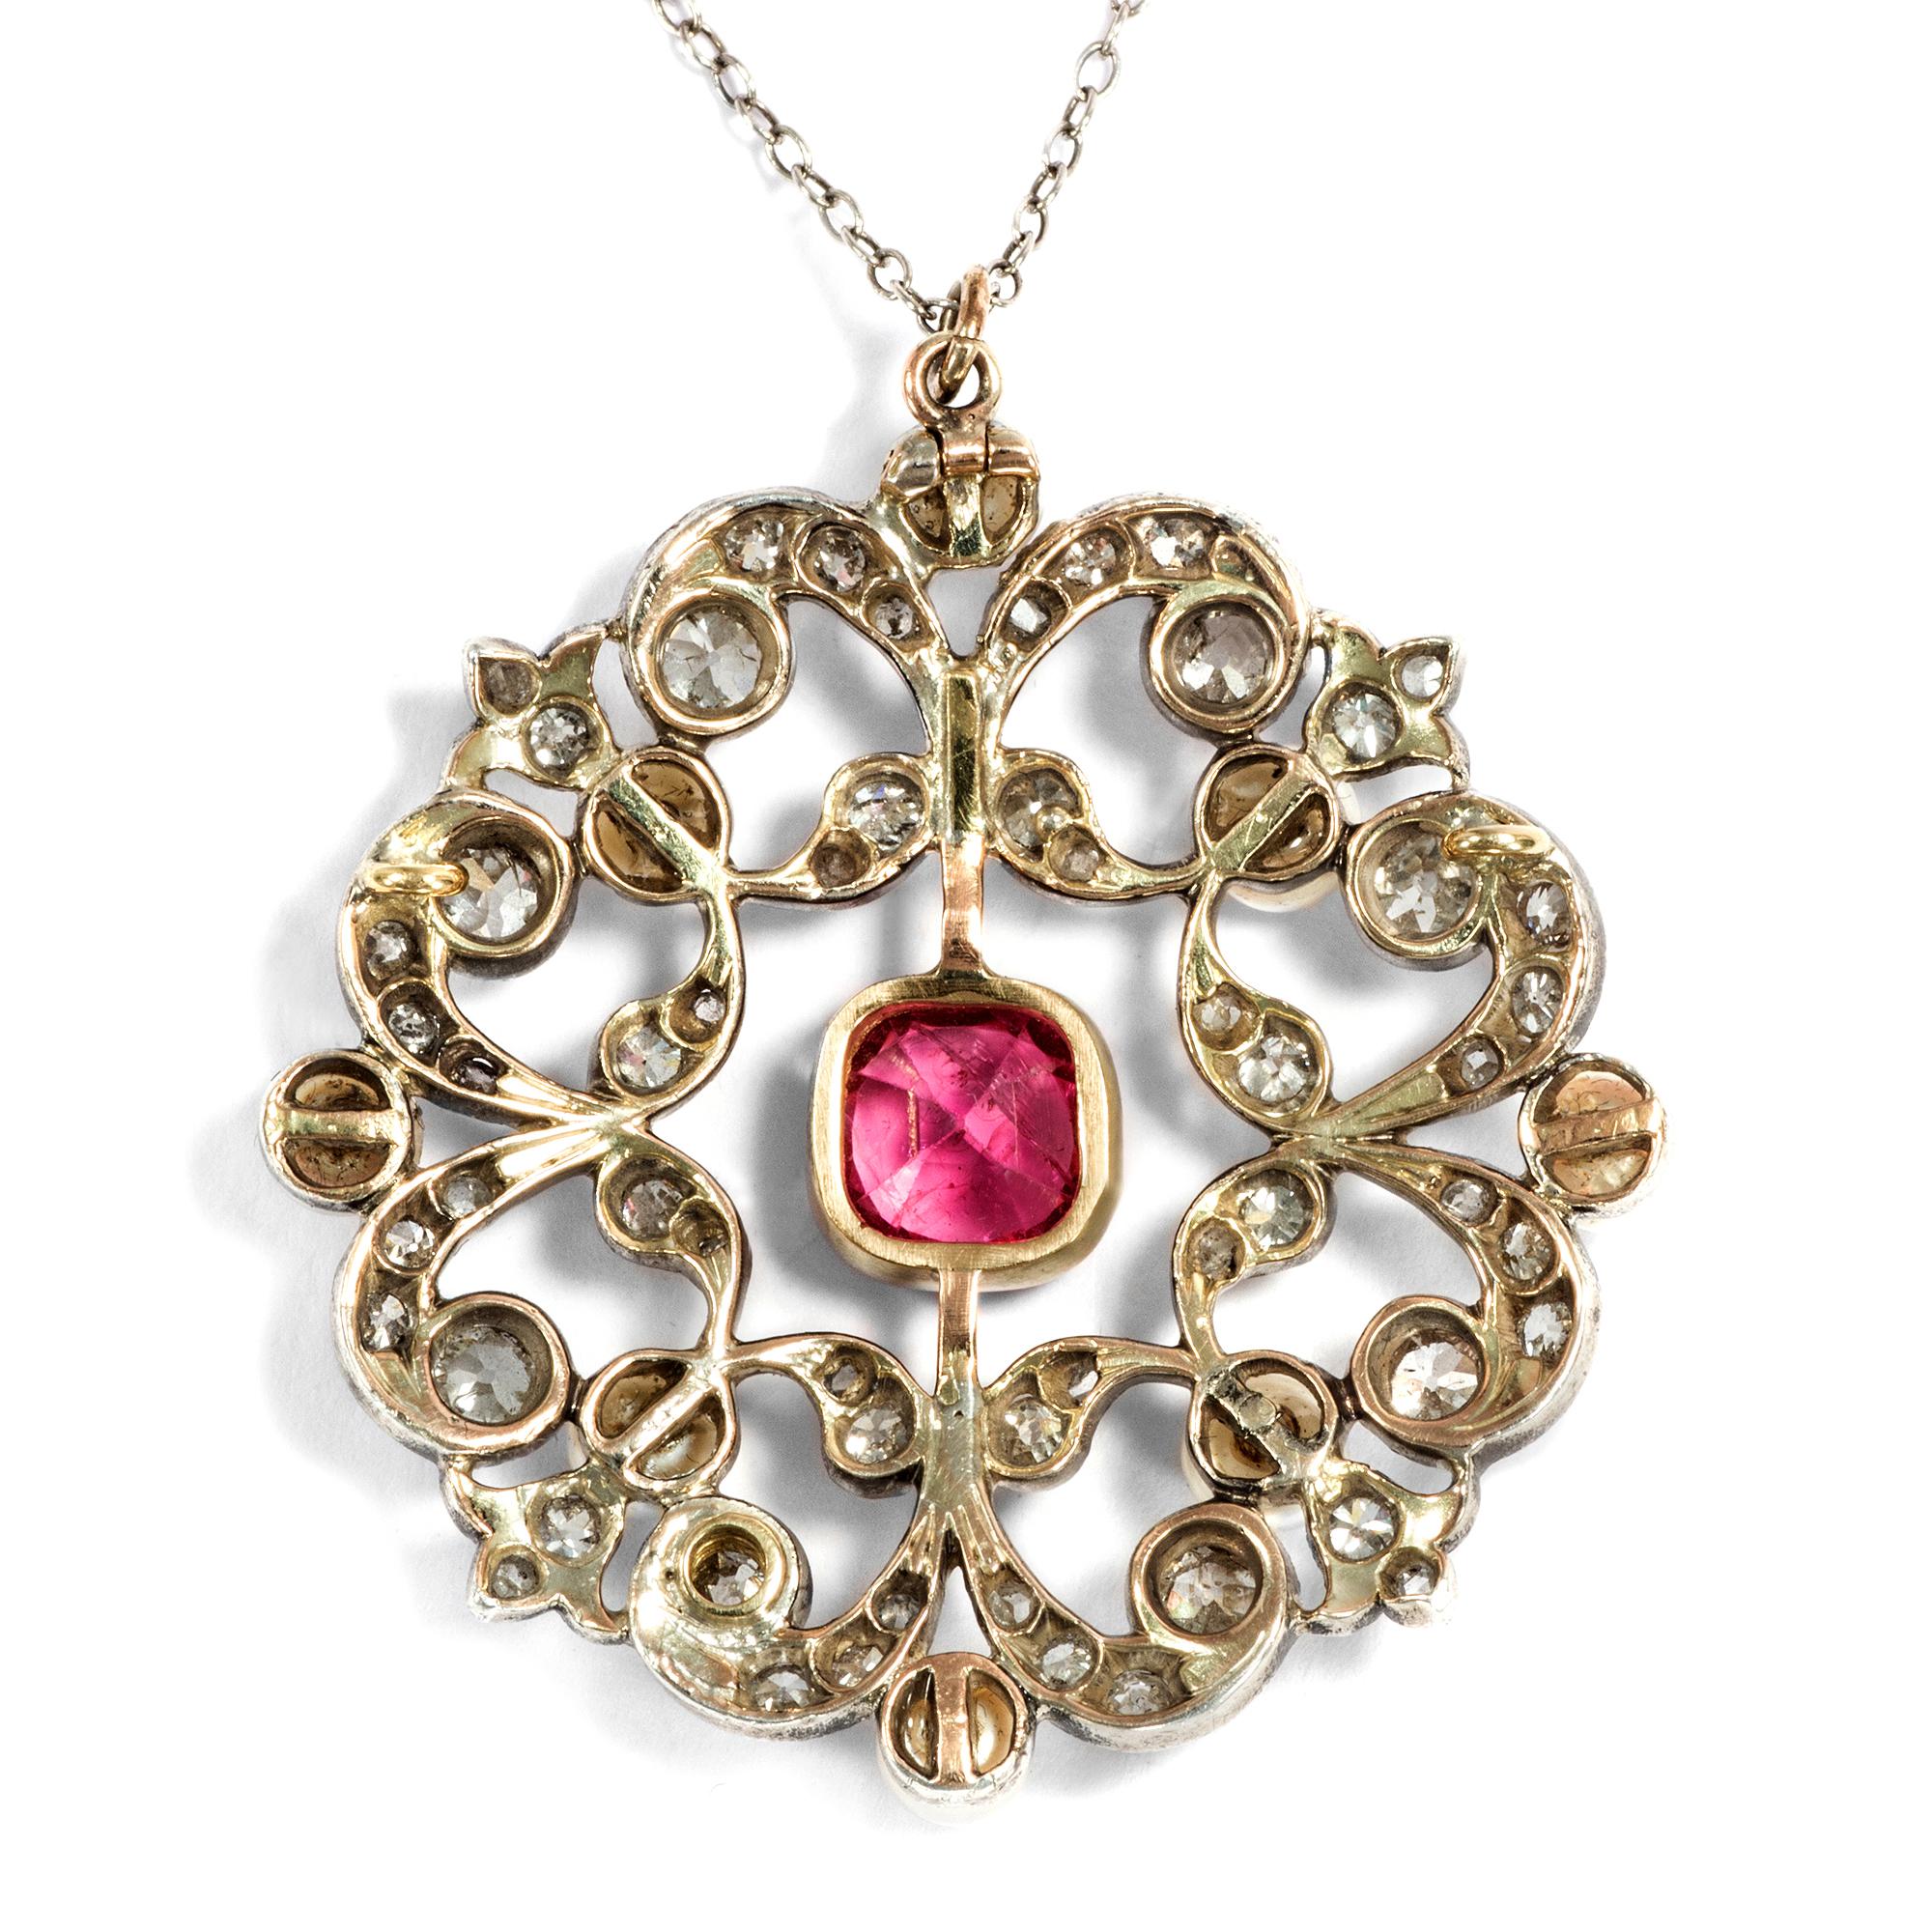 Belle Époque circa 1890, 1.92 Ct Diamond 1.7 Ct Red Spinel Natural Pearl Pendant In Excellent Condition For Sale In Berlin, Berlin